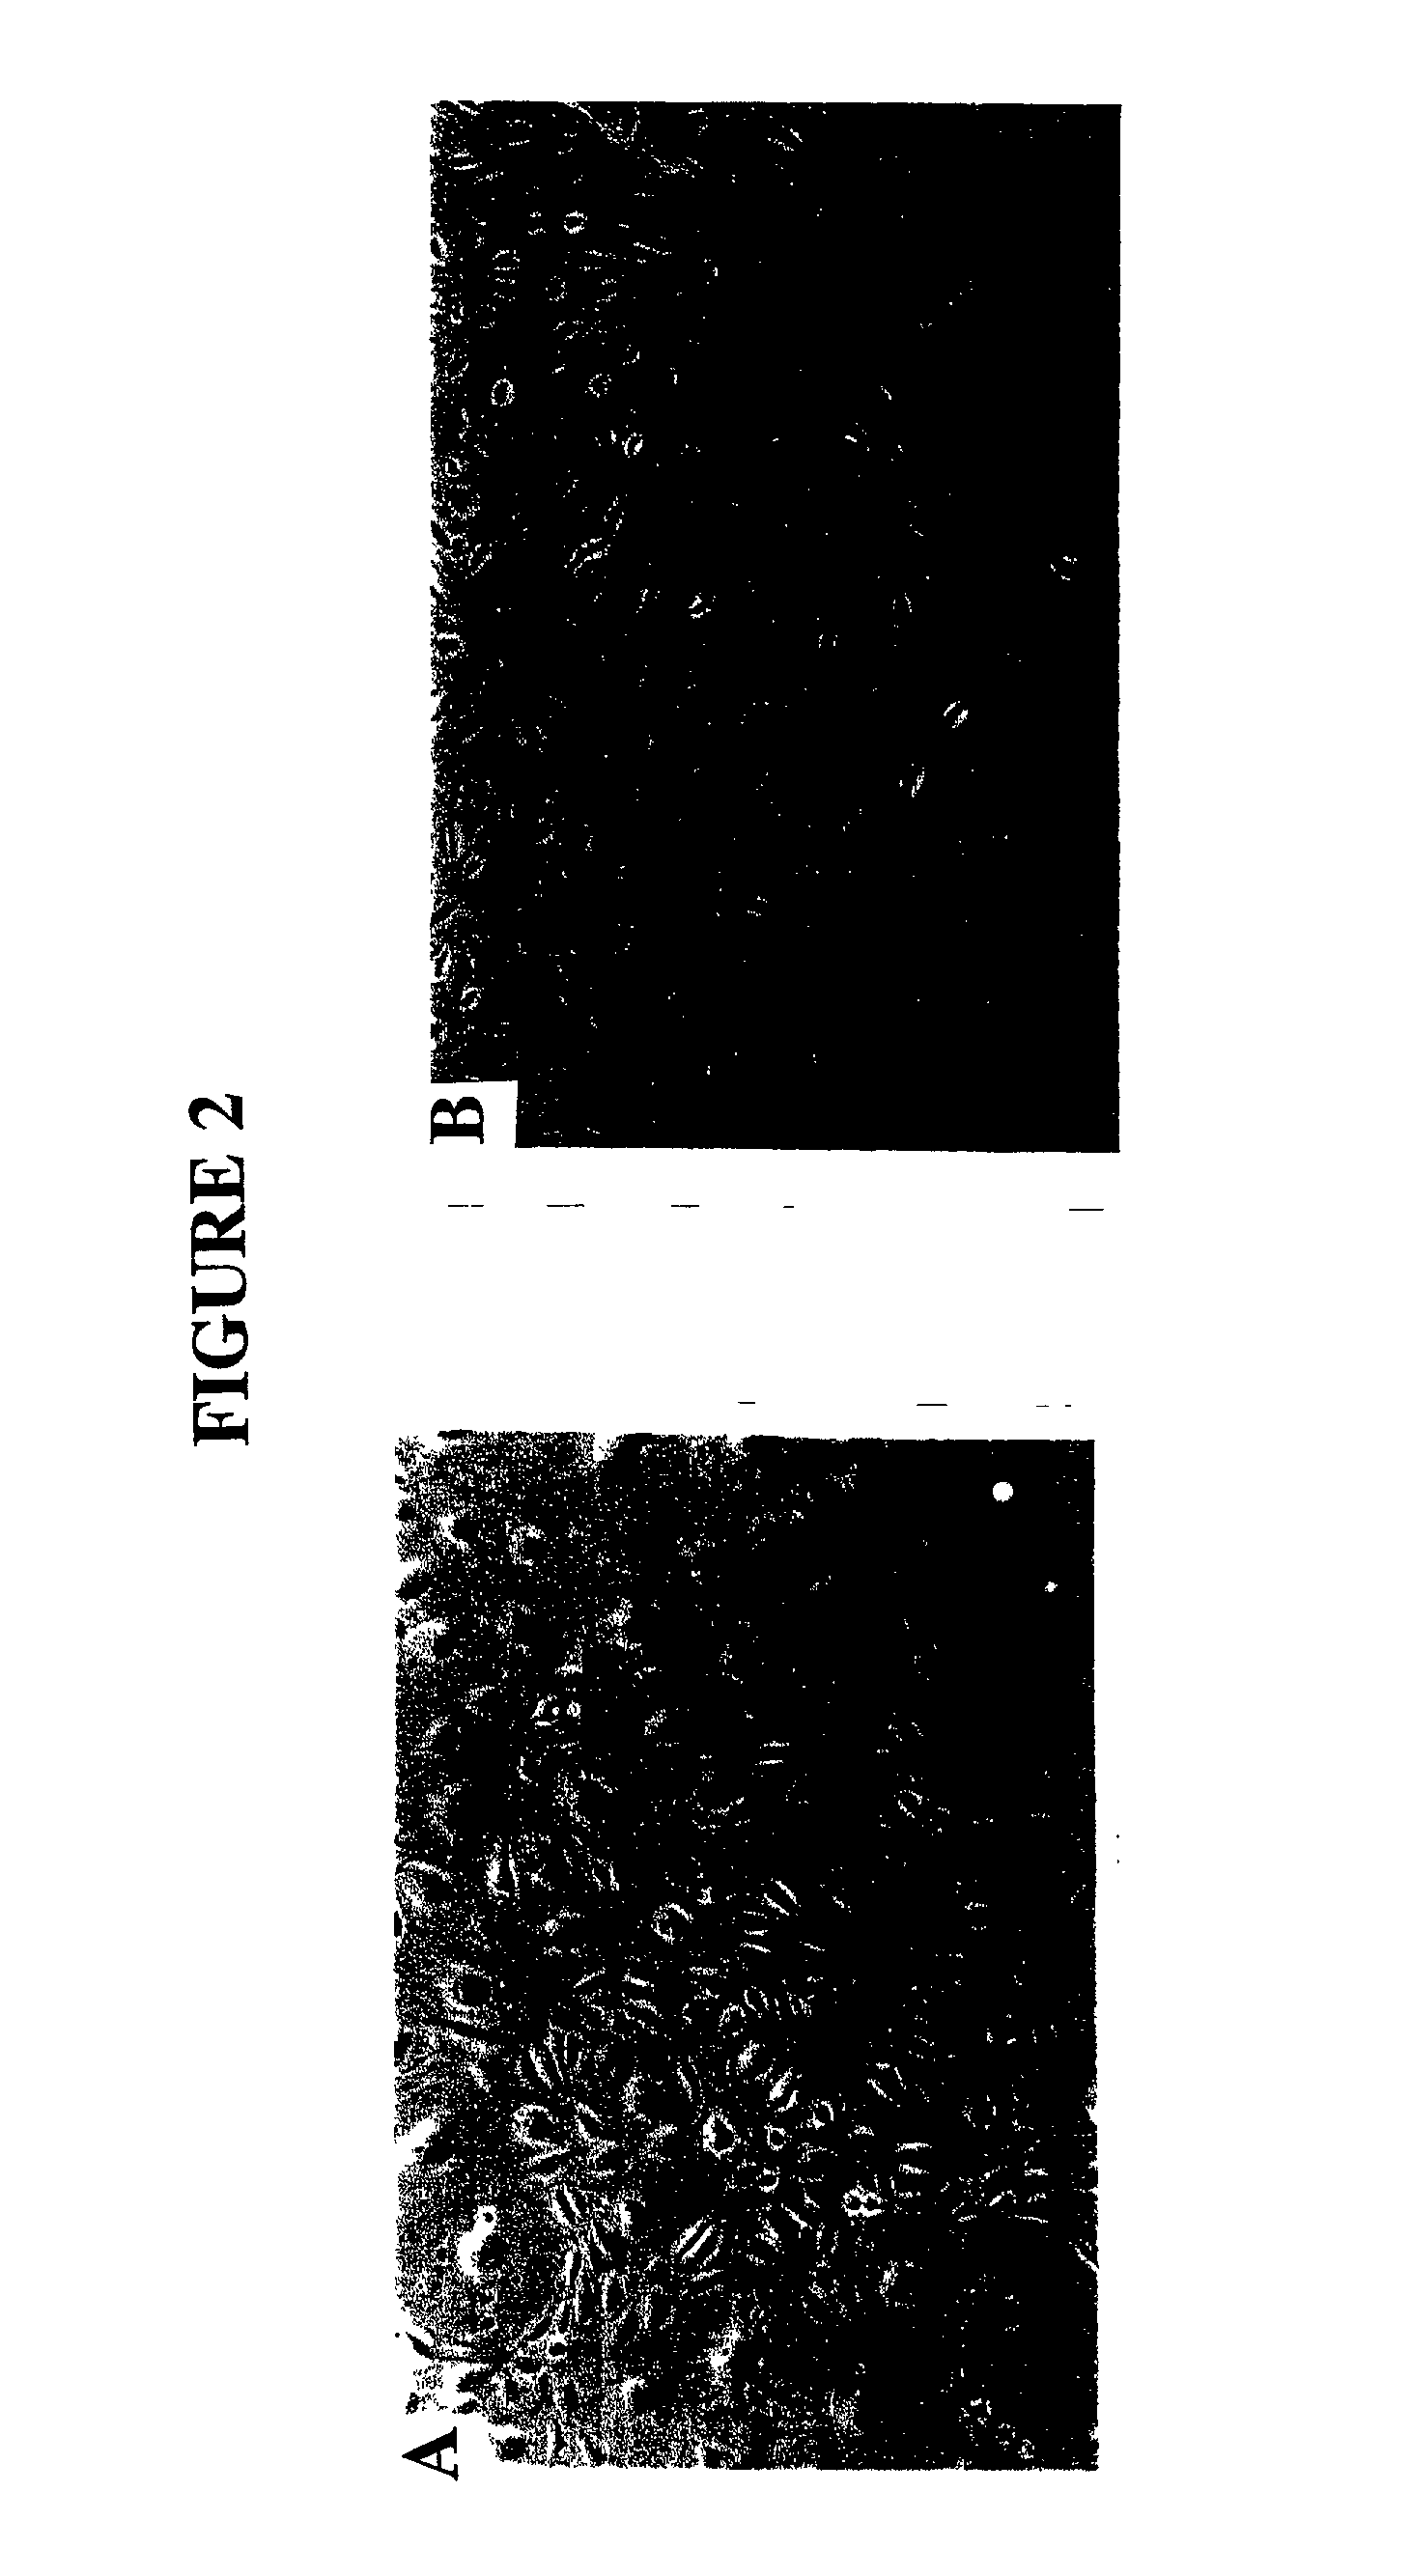 Method for culturing cells